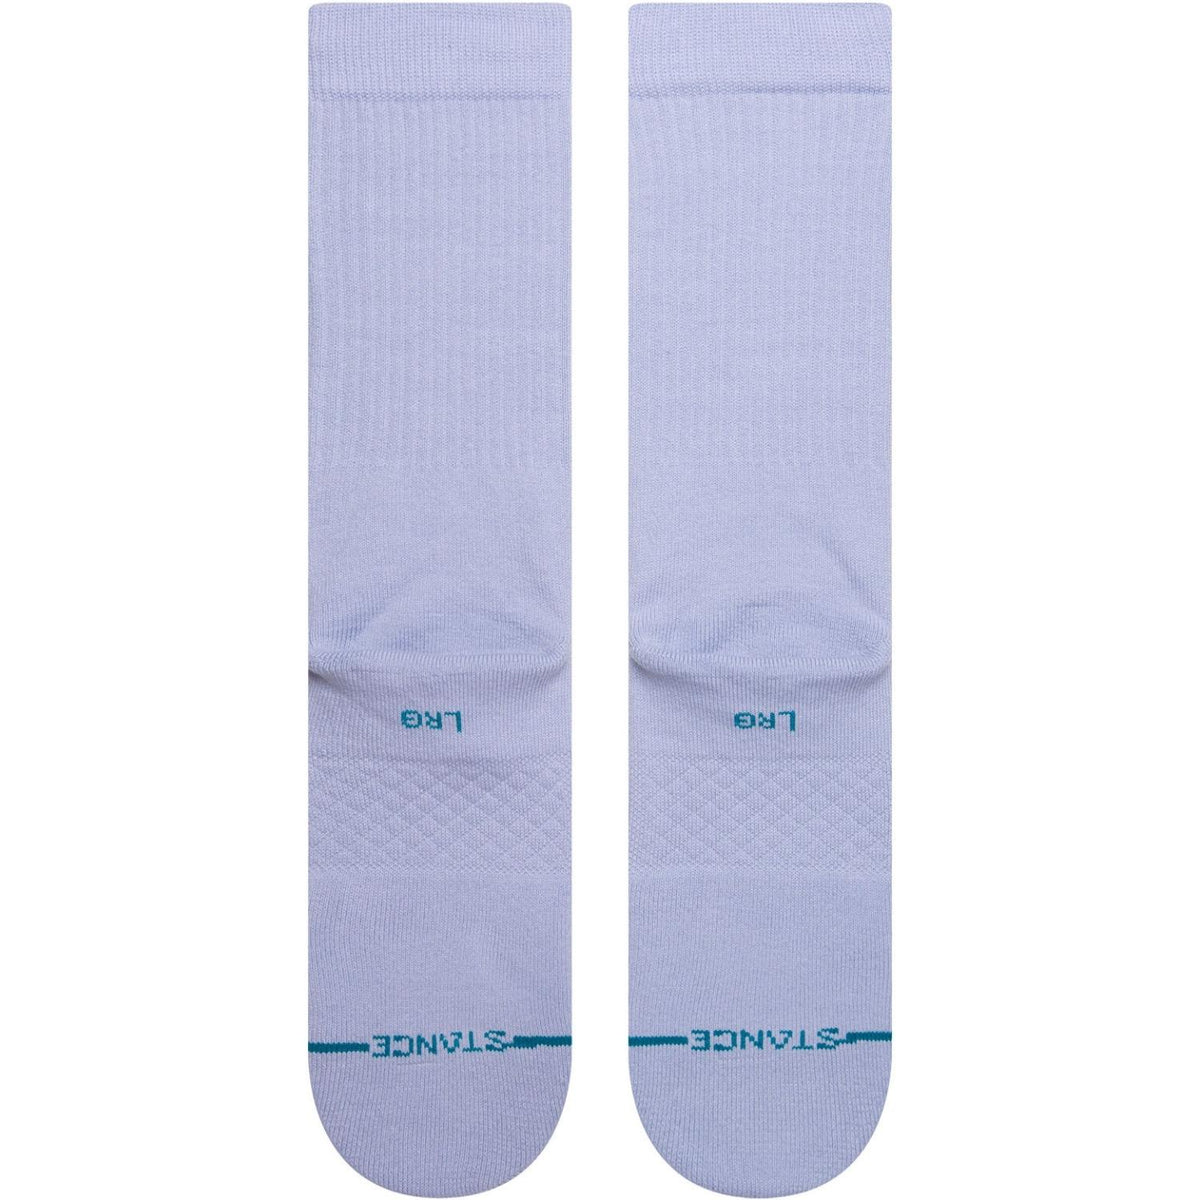 Stance Icon Crew Socks - Lilac Ice - Unisex Crew Length Socks by Stance L (UK8-12.5)